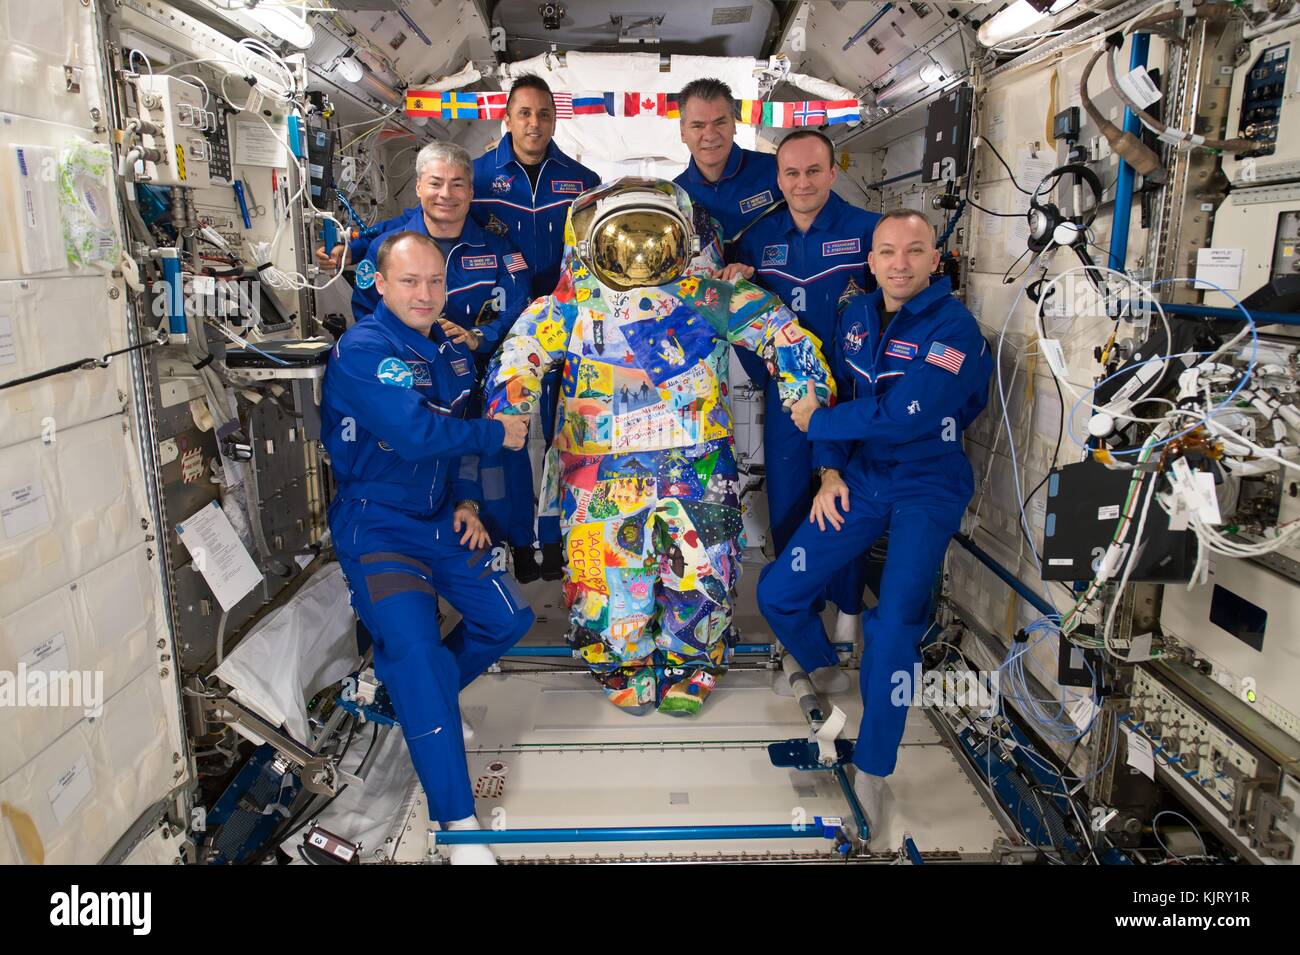 NASA Expedition 53 prime crew members (L-R) Russian cosmonaut Alexander Misurkin of Roscosmos, American astronauts Mark Vande Hei and Joe Acaba, Italian astronaut Paolo Nespoli of the European Space Agency, Russian cosmonaut Sergey Ryazanskiy of Roscosmos, and American astronaut Randy Bresnik pose with a spacesuit hand-painted by cancer patients from the M.D. Anderson Cancer Center aboard the International Space Station Japanese Kibo Laboratory module November 12, 2017 in Earth orbit.  (photo by NASA Photo via Planetpix) Stock Photo